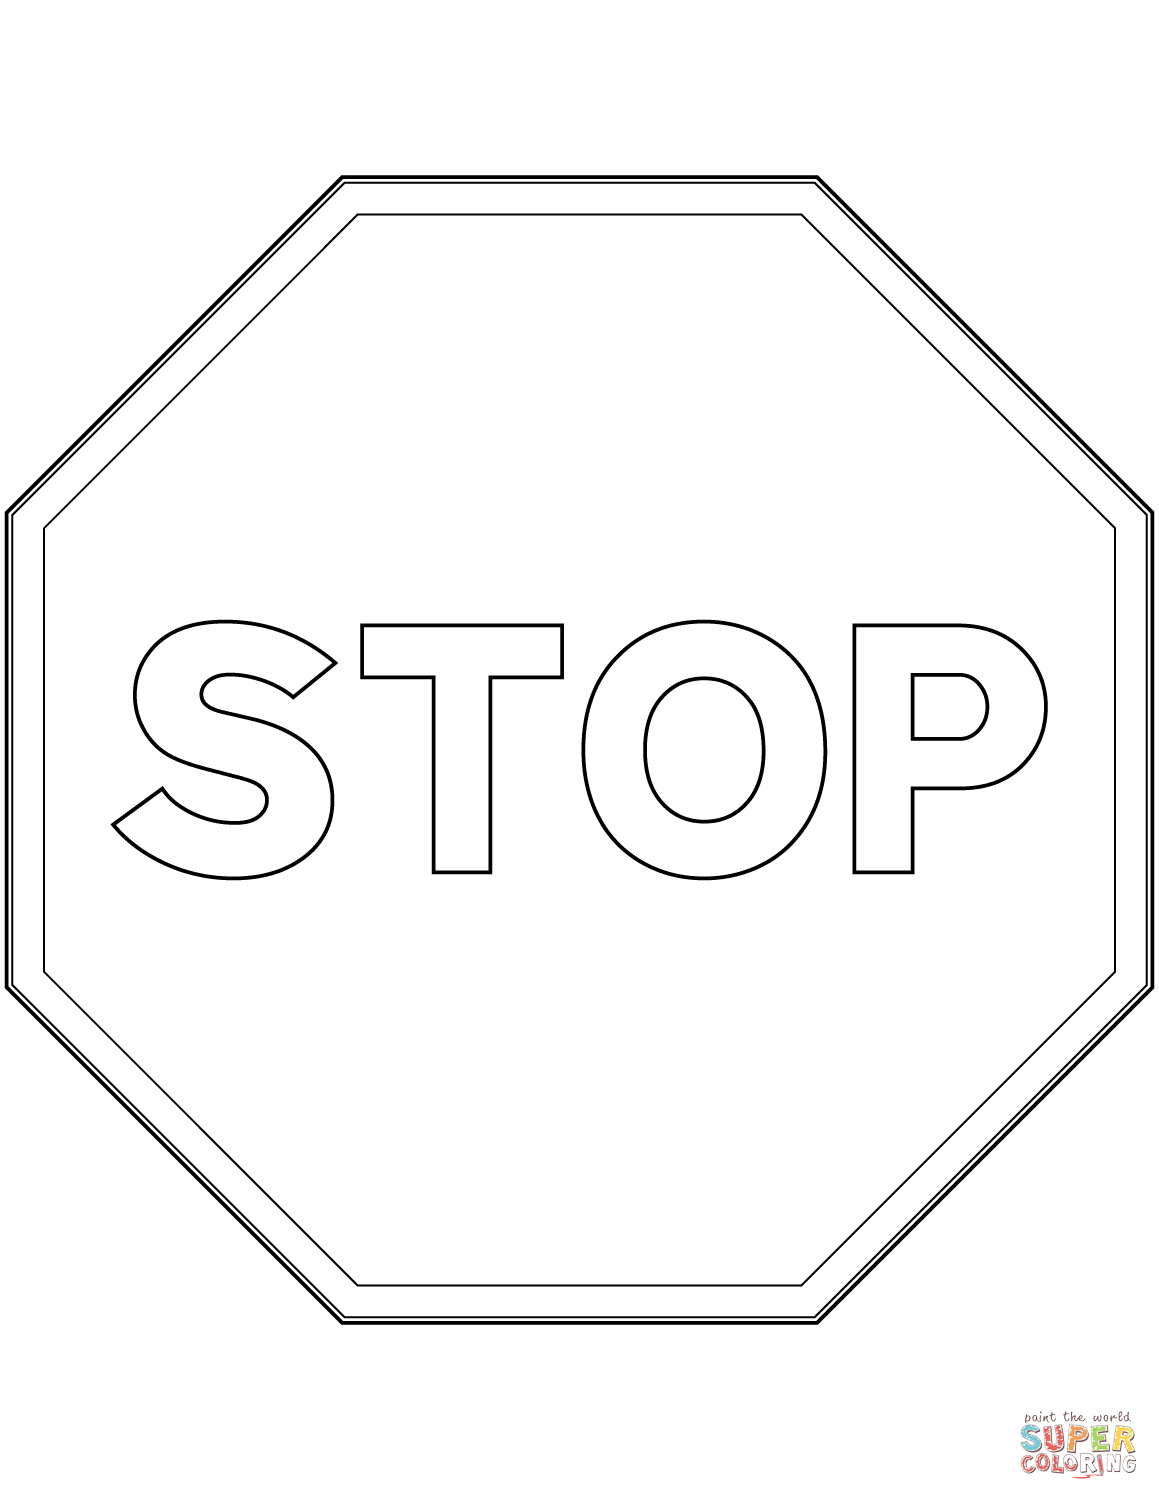 Stop sign in spain coloring page free printable coloring pages